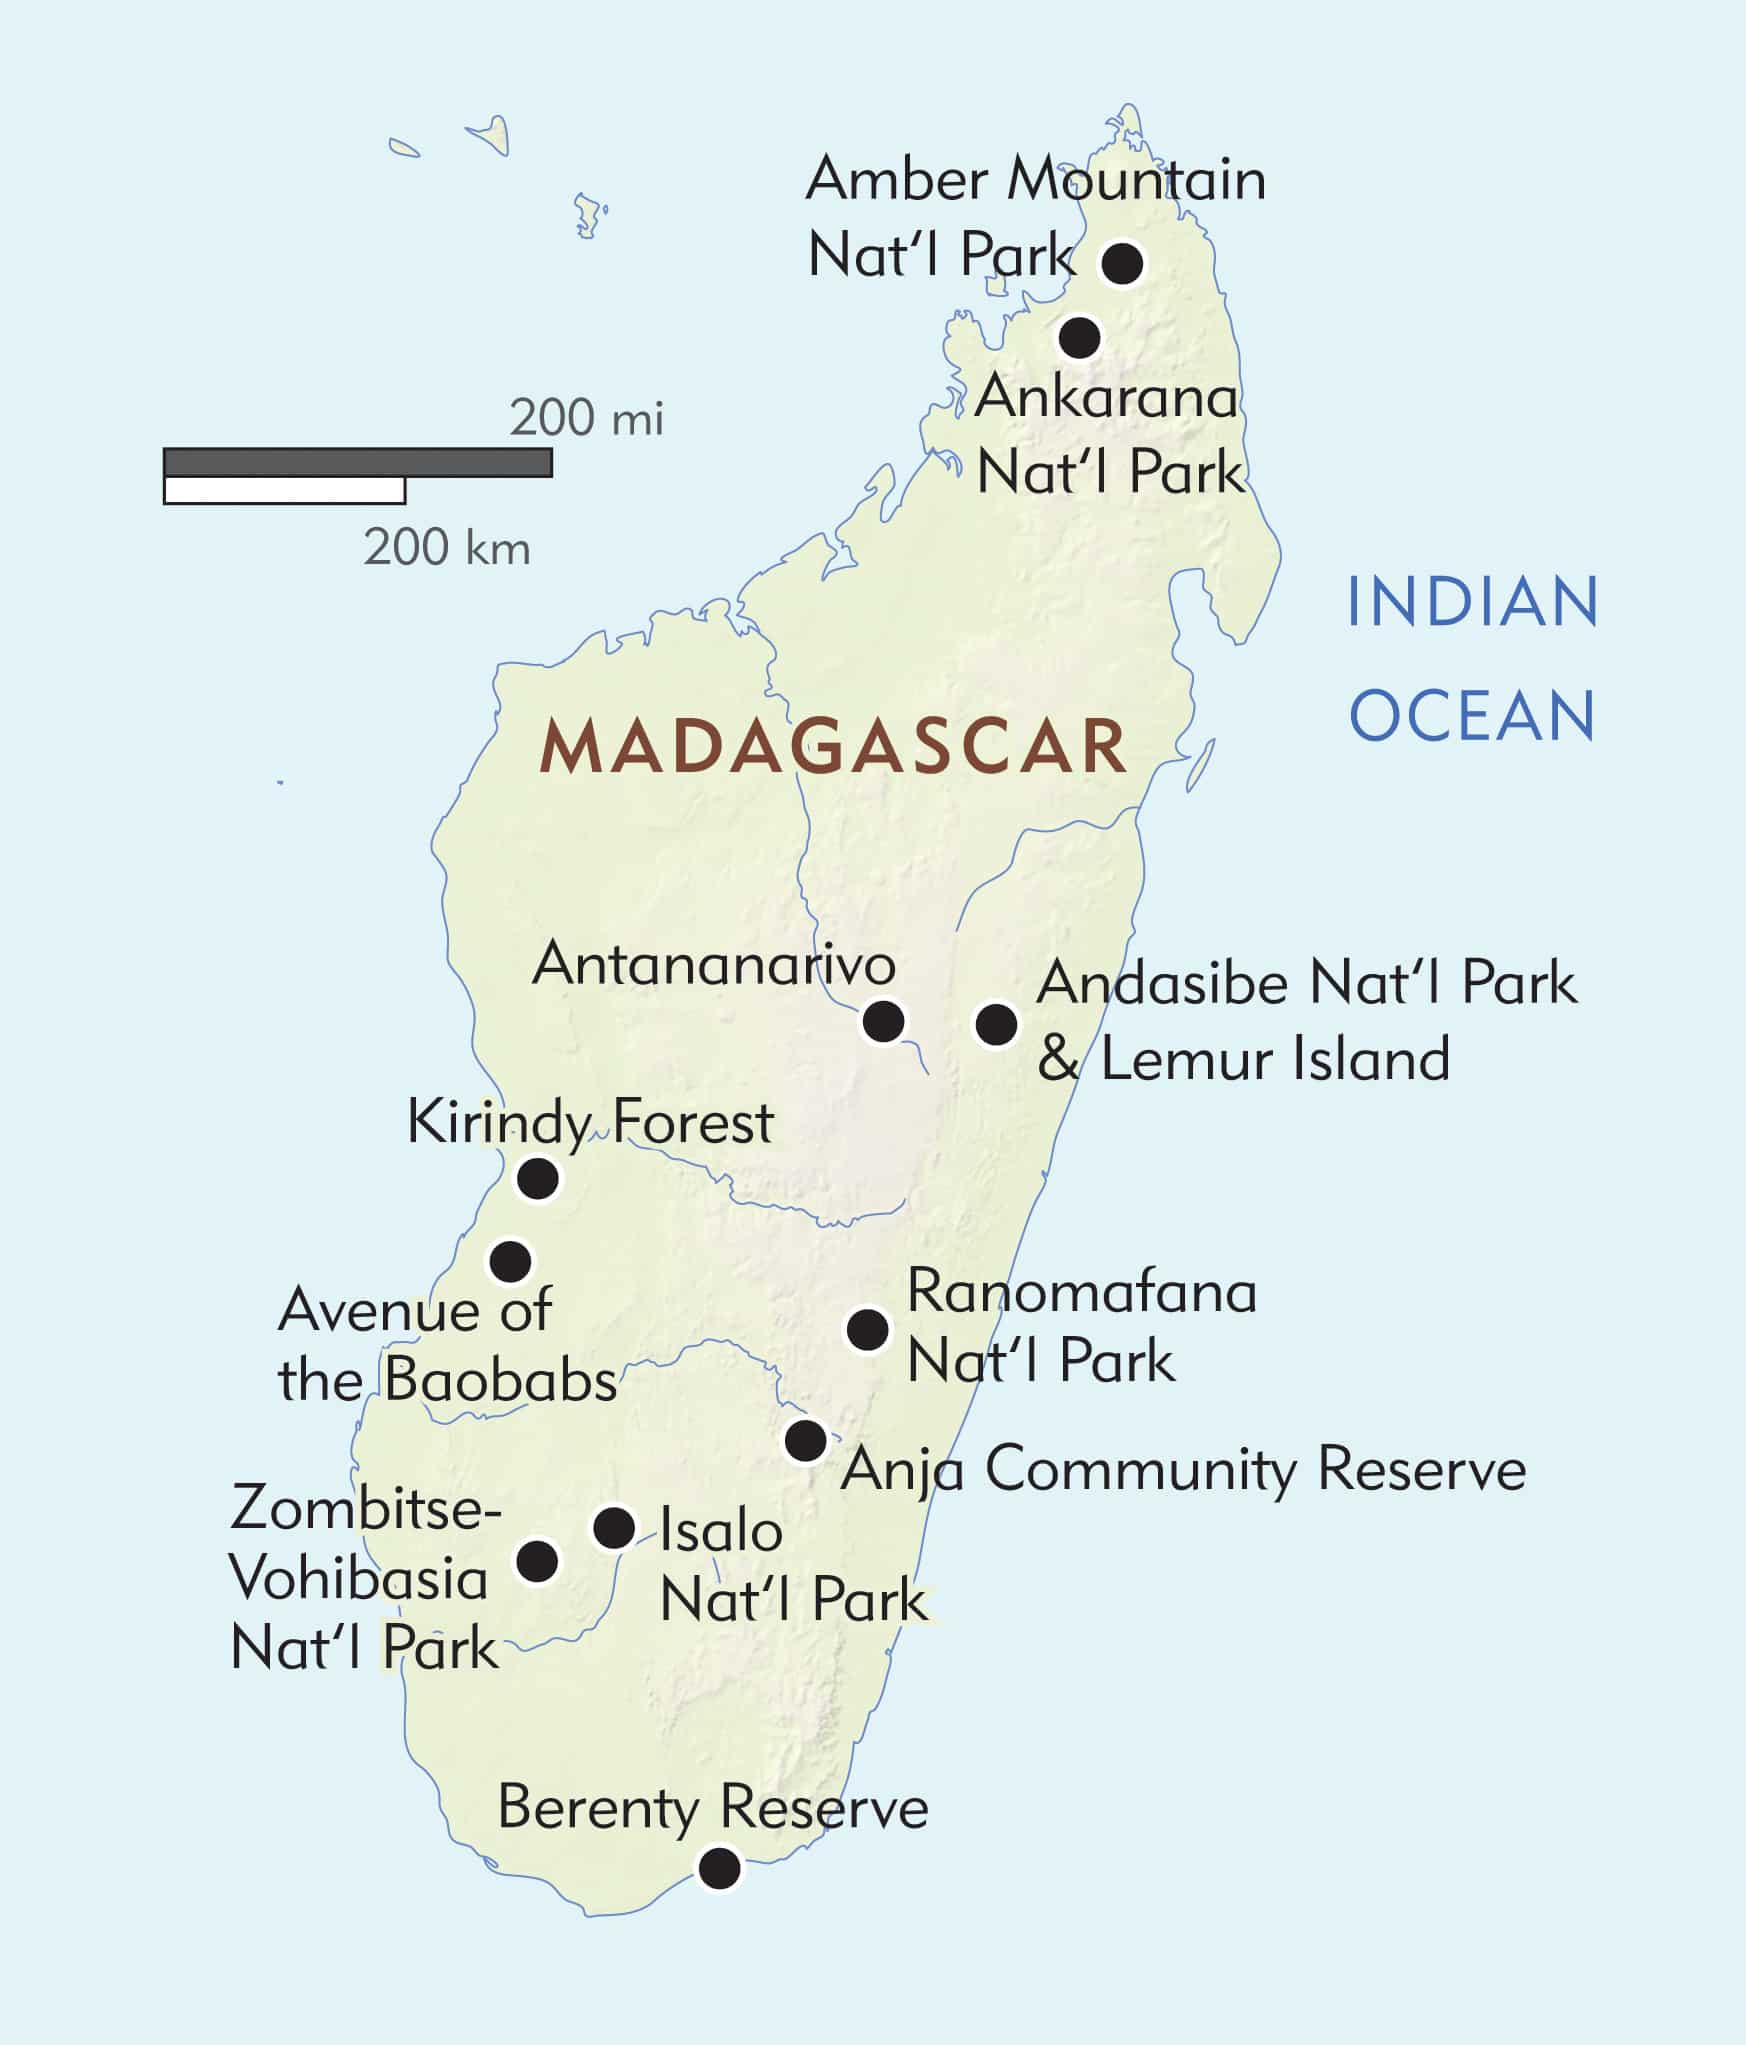 Location of study sites at Ibity mountain, Madagascar, with different